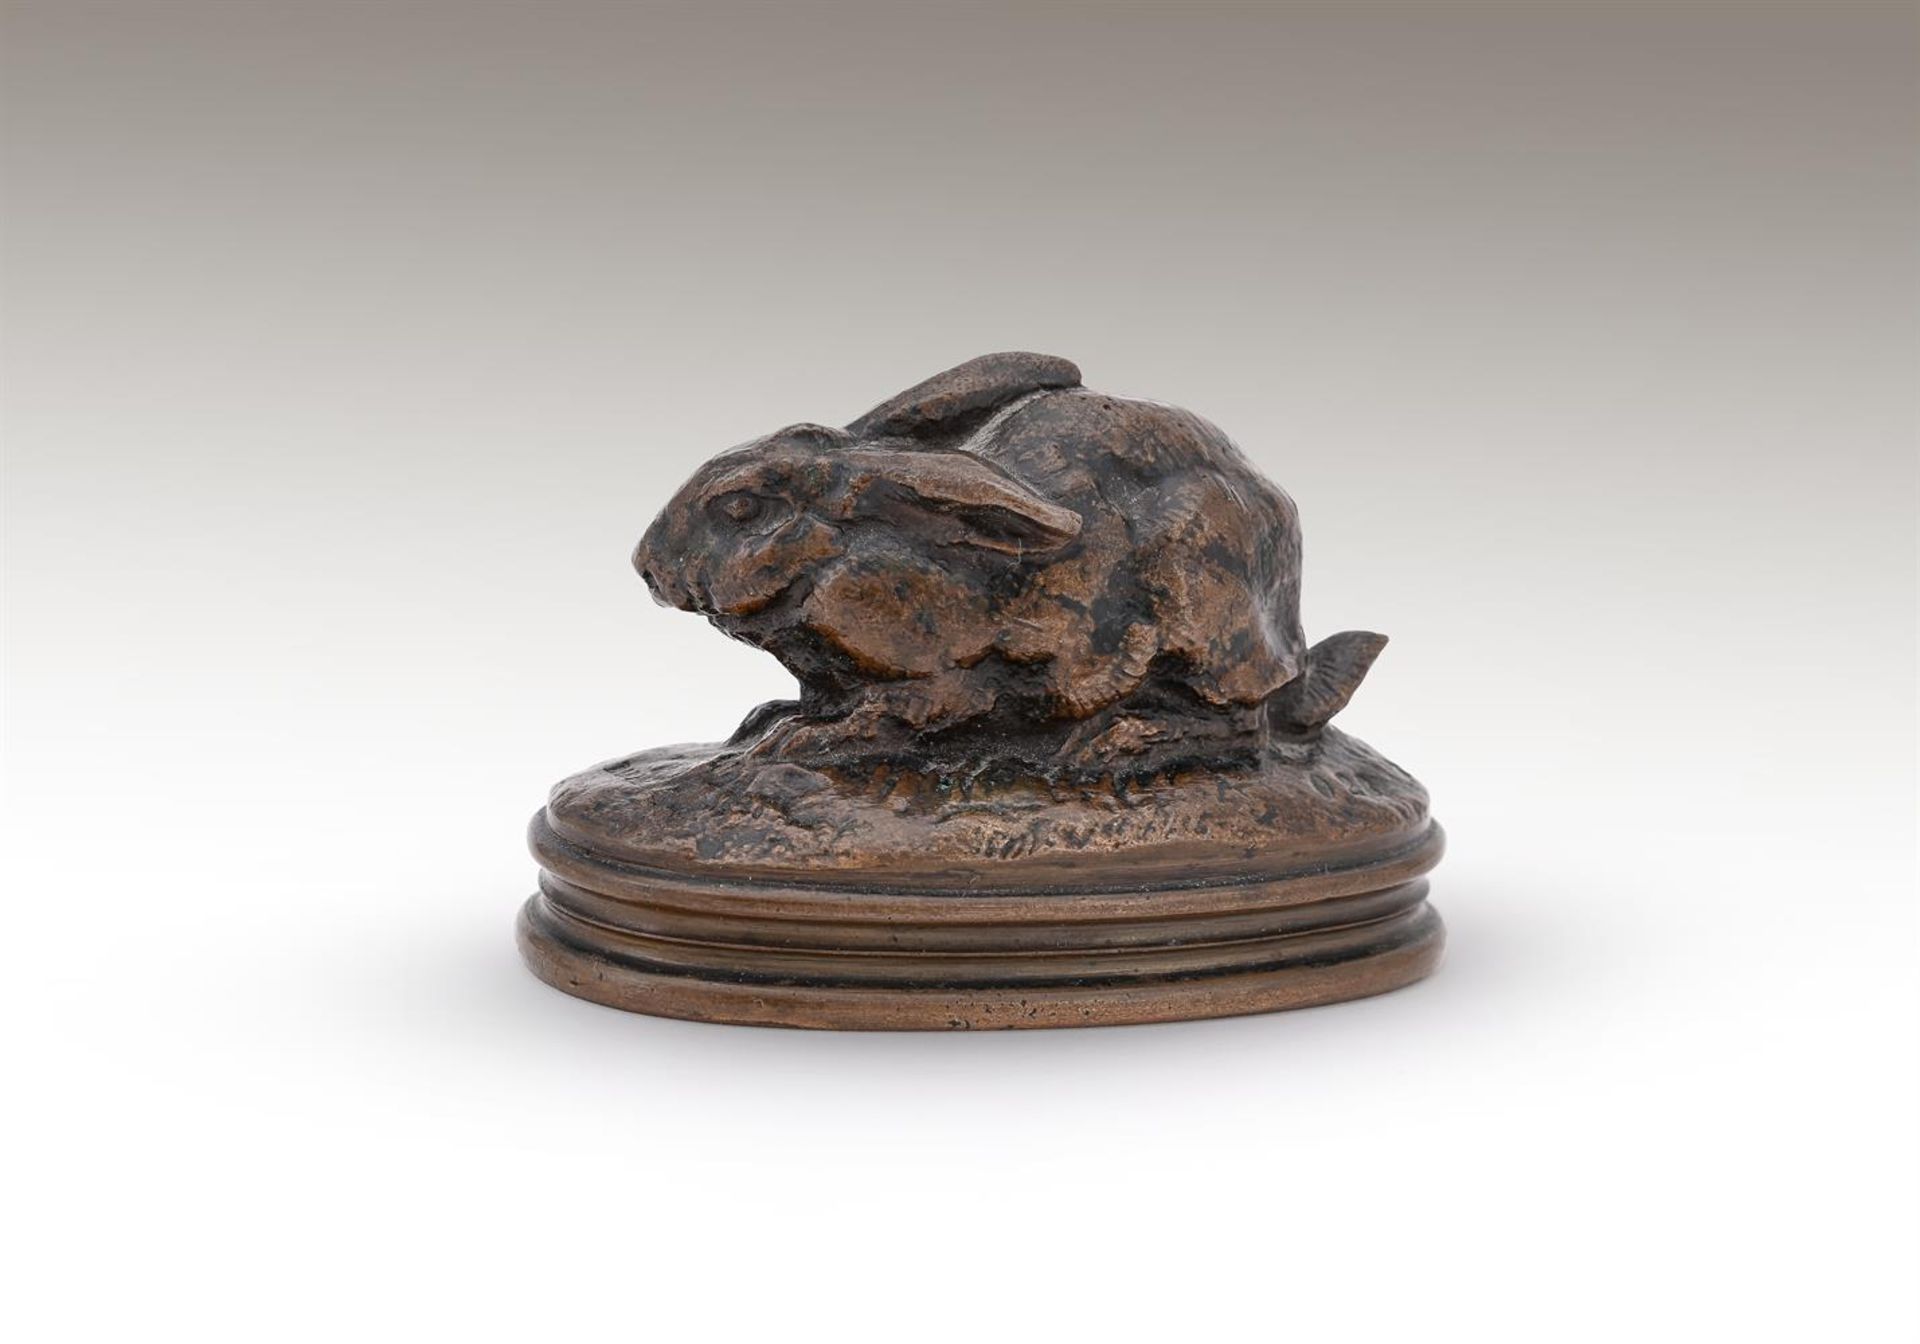 ANTOINE-LOUIS BARYE (FRENCH, 1795-1875), A BRONZE MODEL OF A CROUCHING RABBIT - Image 6 of 6